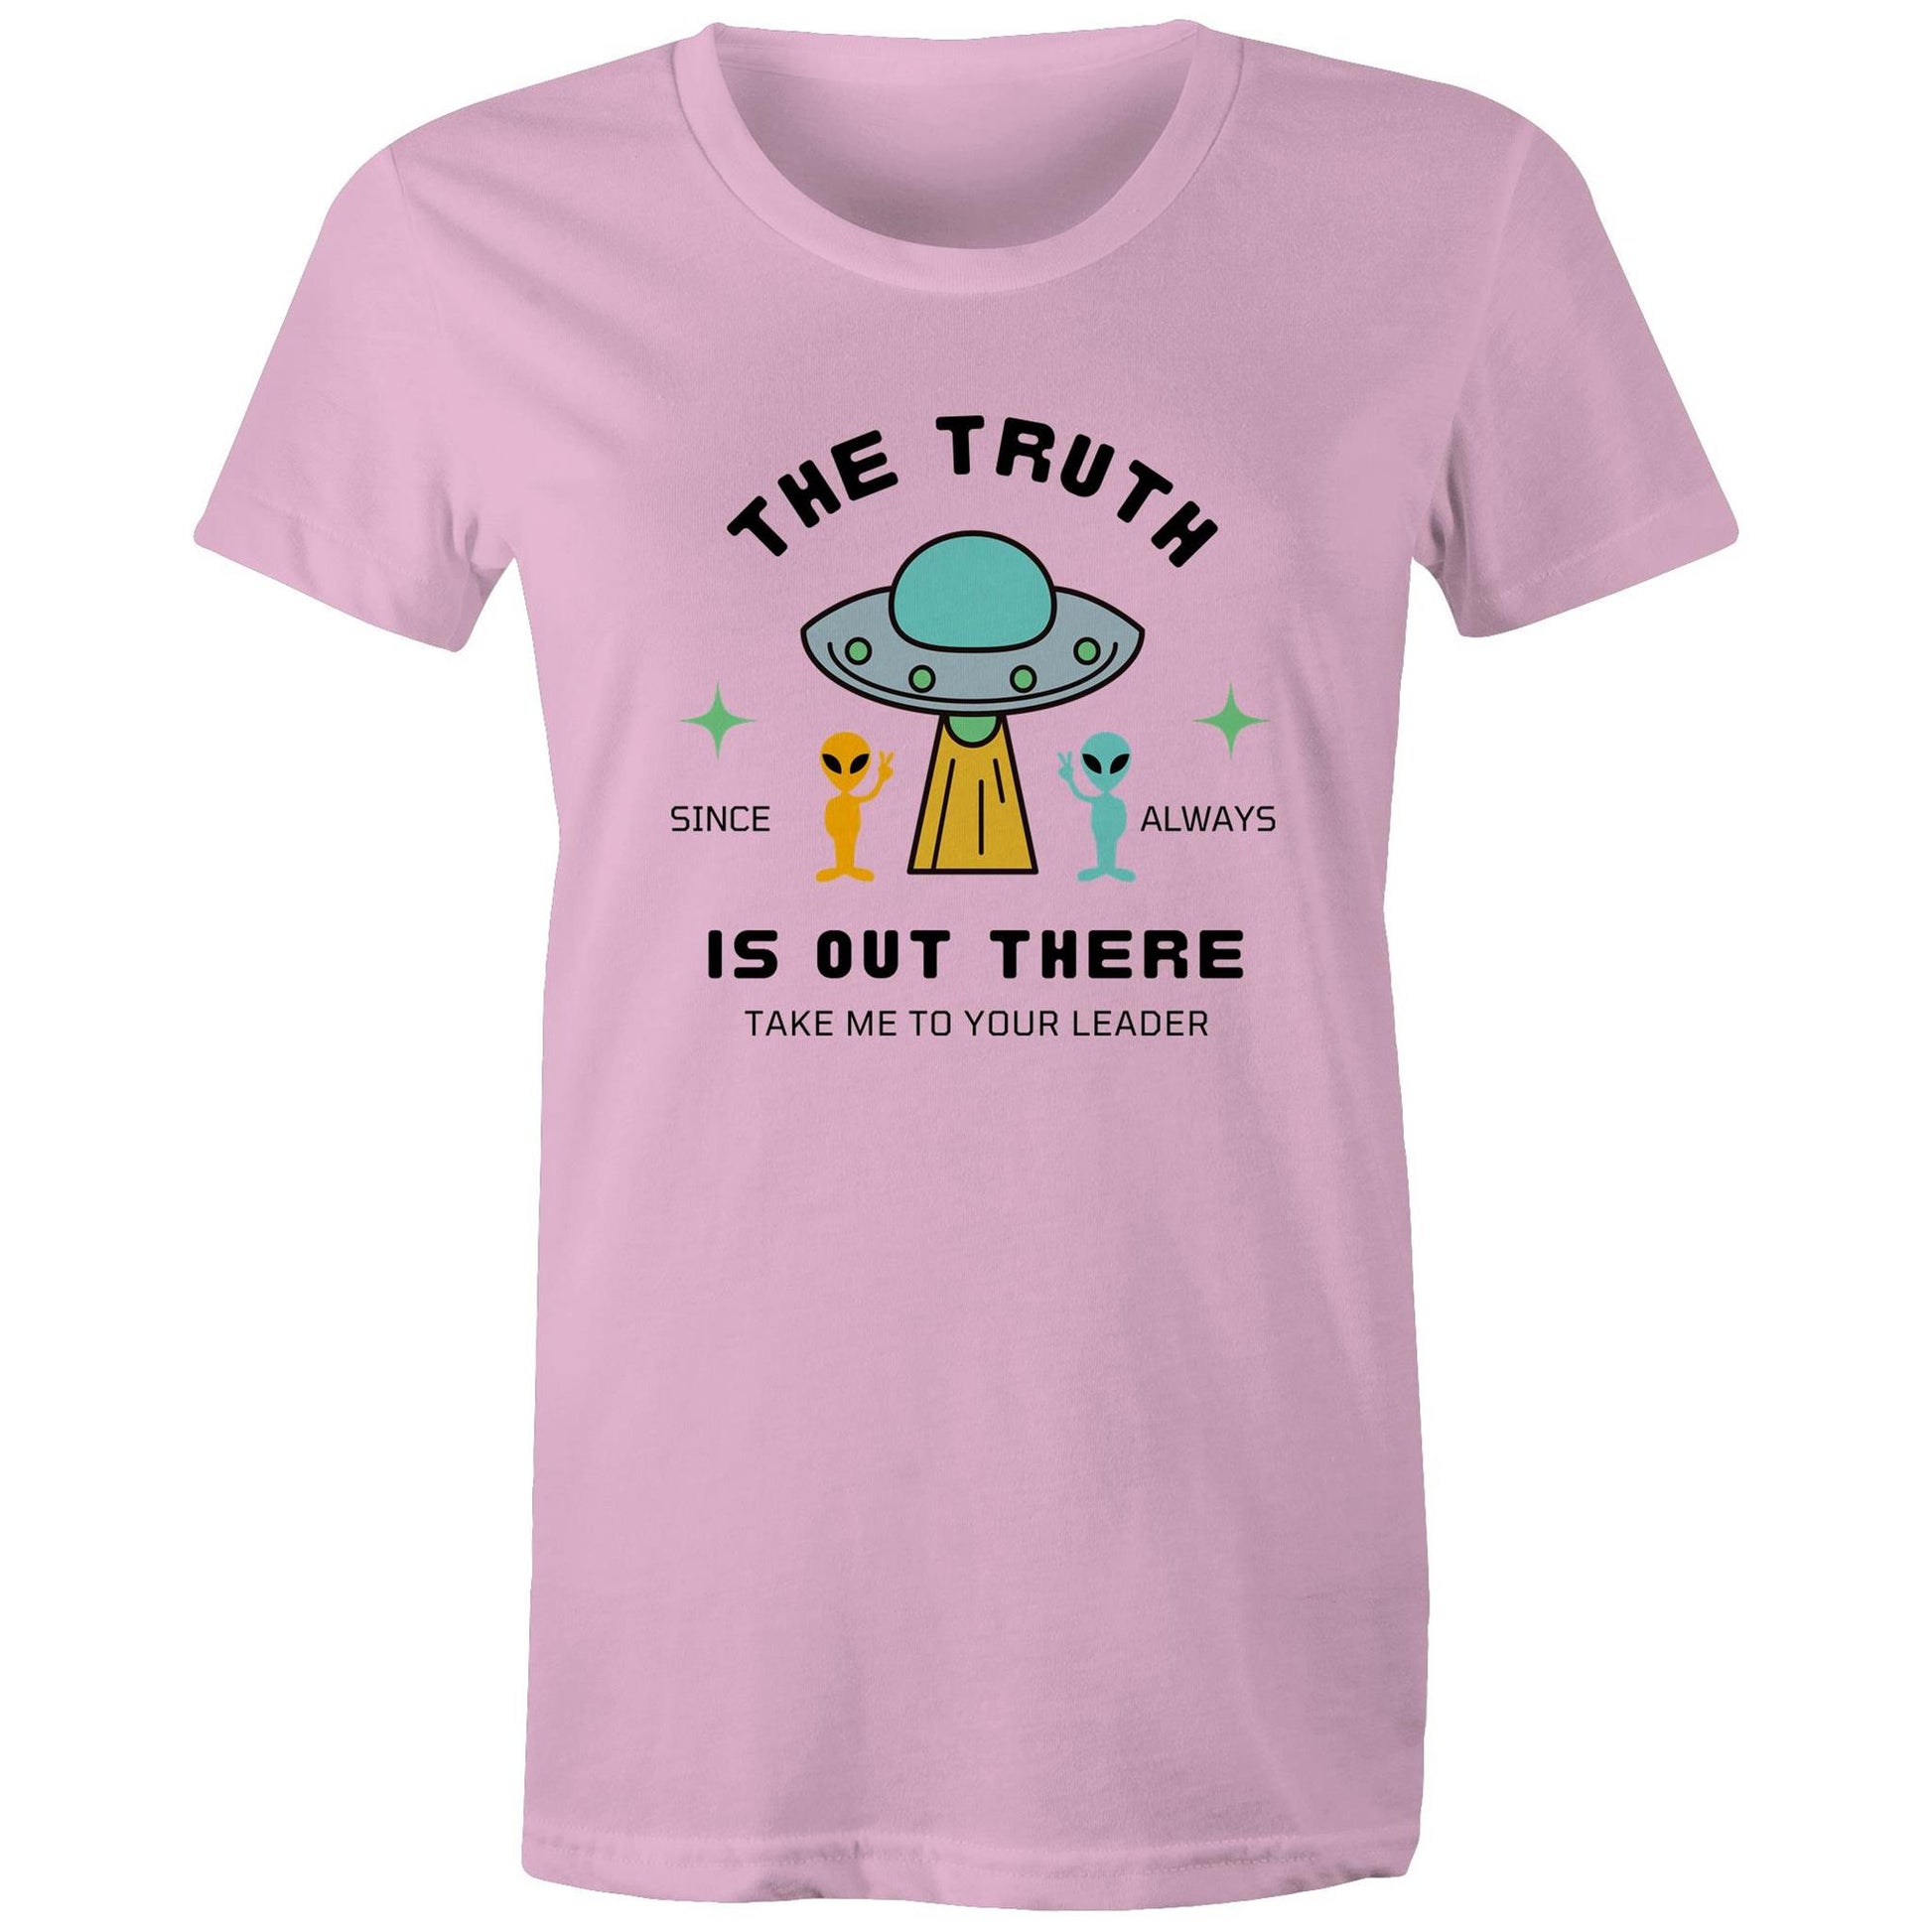 The Truth Is Out There - Womens T-shirt Pink Womens T-shirt Sci Fi